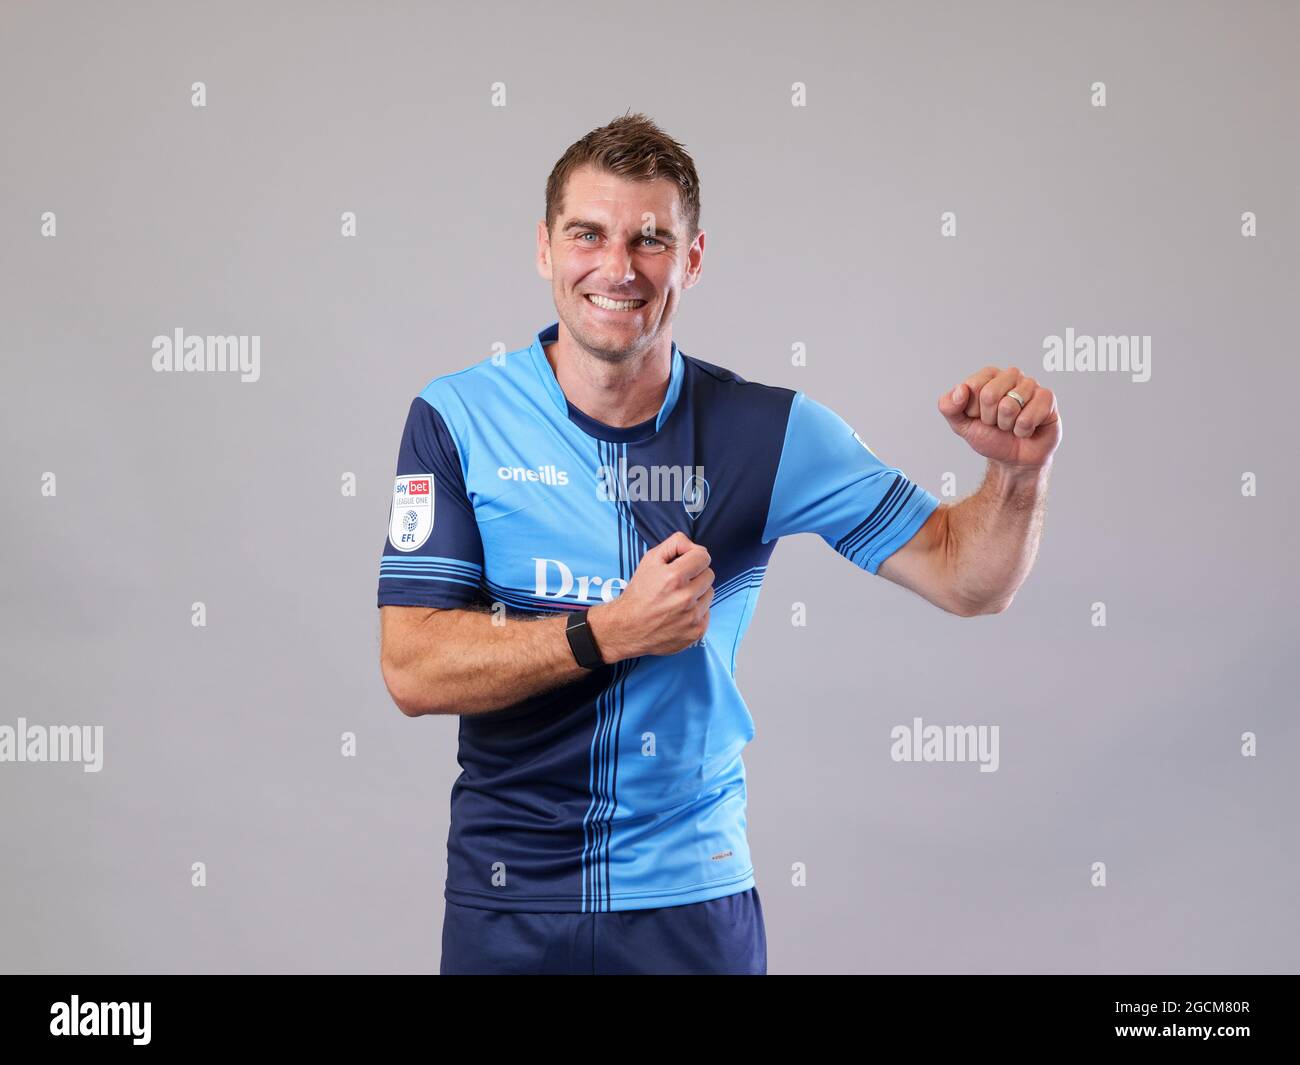 High Wycombe, UK. 03rd Aug, 2021. Sam Vokes of Wycombe Wanderers during the Wycombe Wanderers media day including staff headshots and training at Adams Park, High Wycombe, England on the 3 August 2021. Photo by Andy Rowland. Credit: PRiME Media Images/Alamy Live News Stock Photo